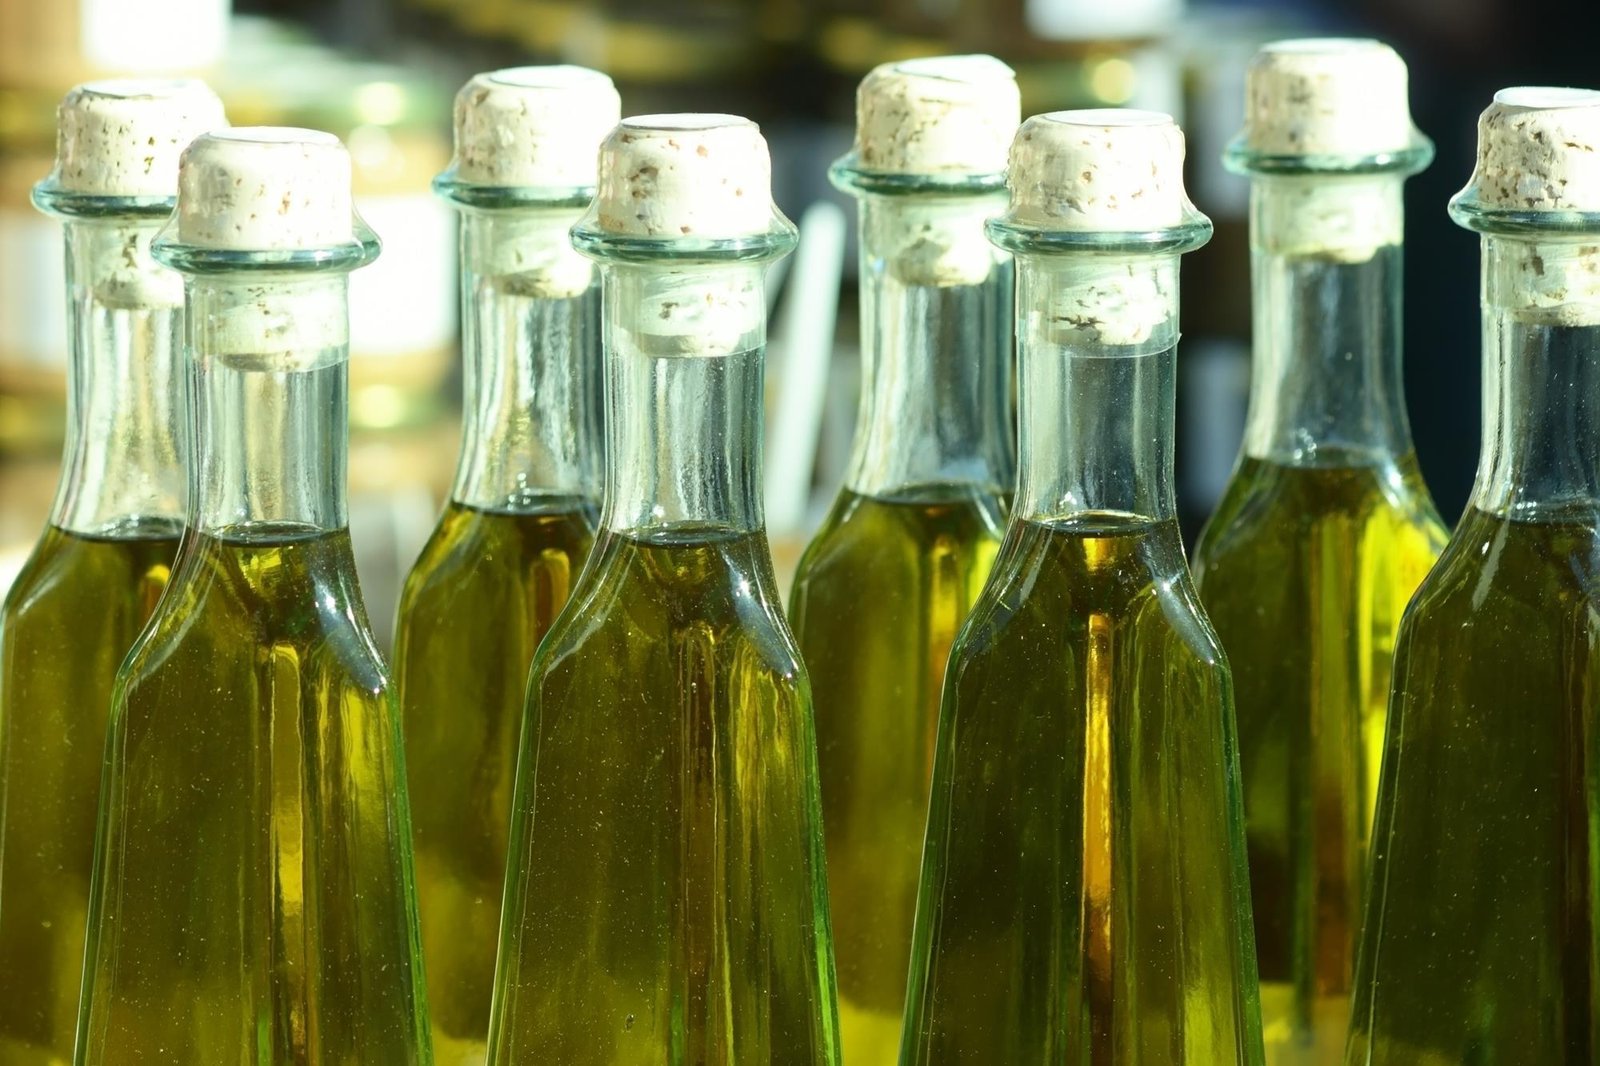 fssai-intensifies-action-on-adulterated-edible-oil